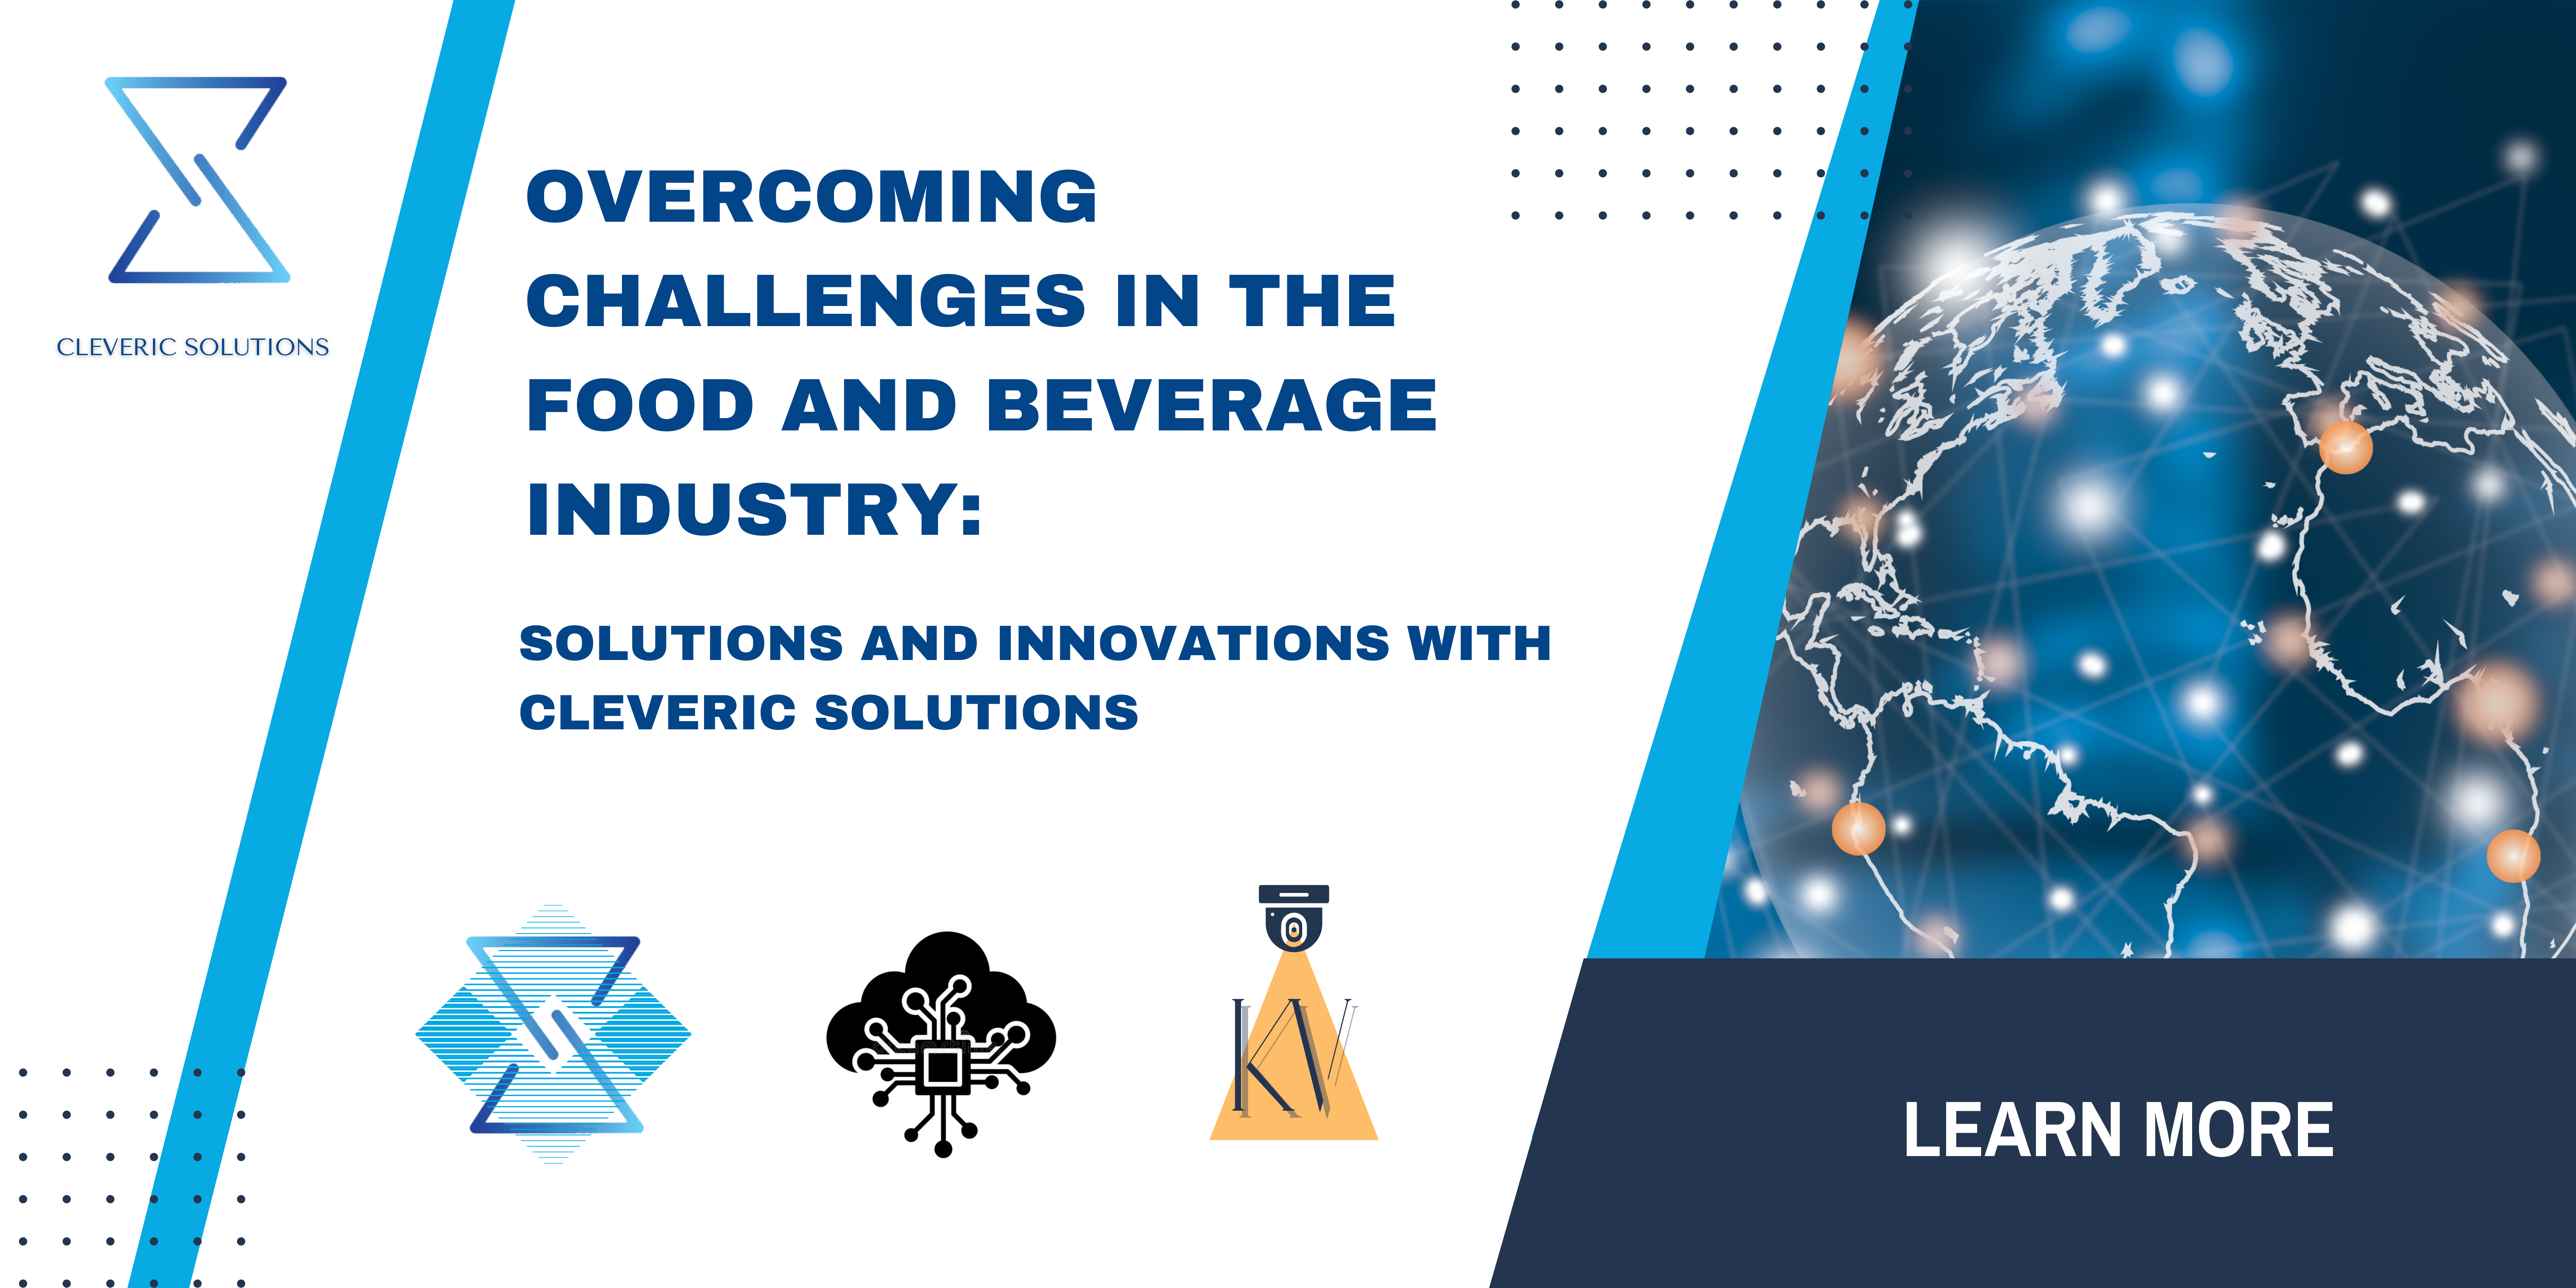 Discover how Cleveric Solutions' AI-based SaaS solutions can help overcome the current challenges faced by the food and beverage industry globally.